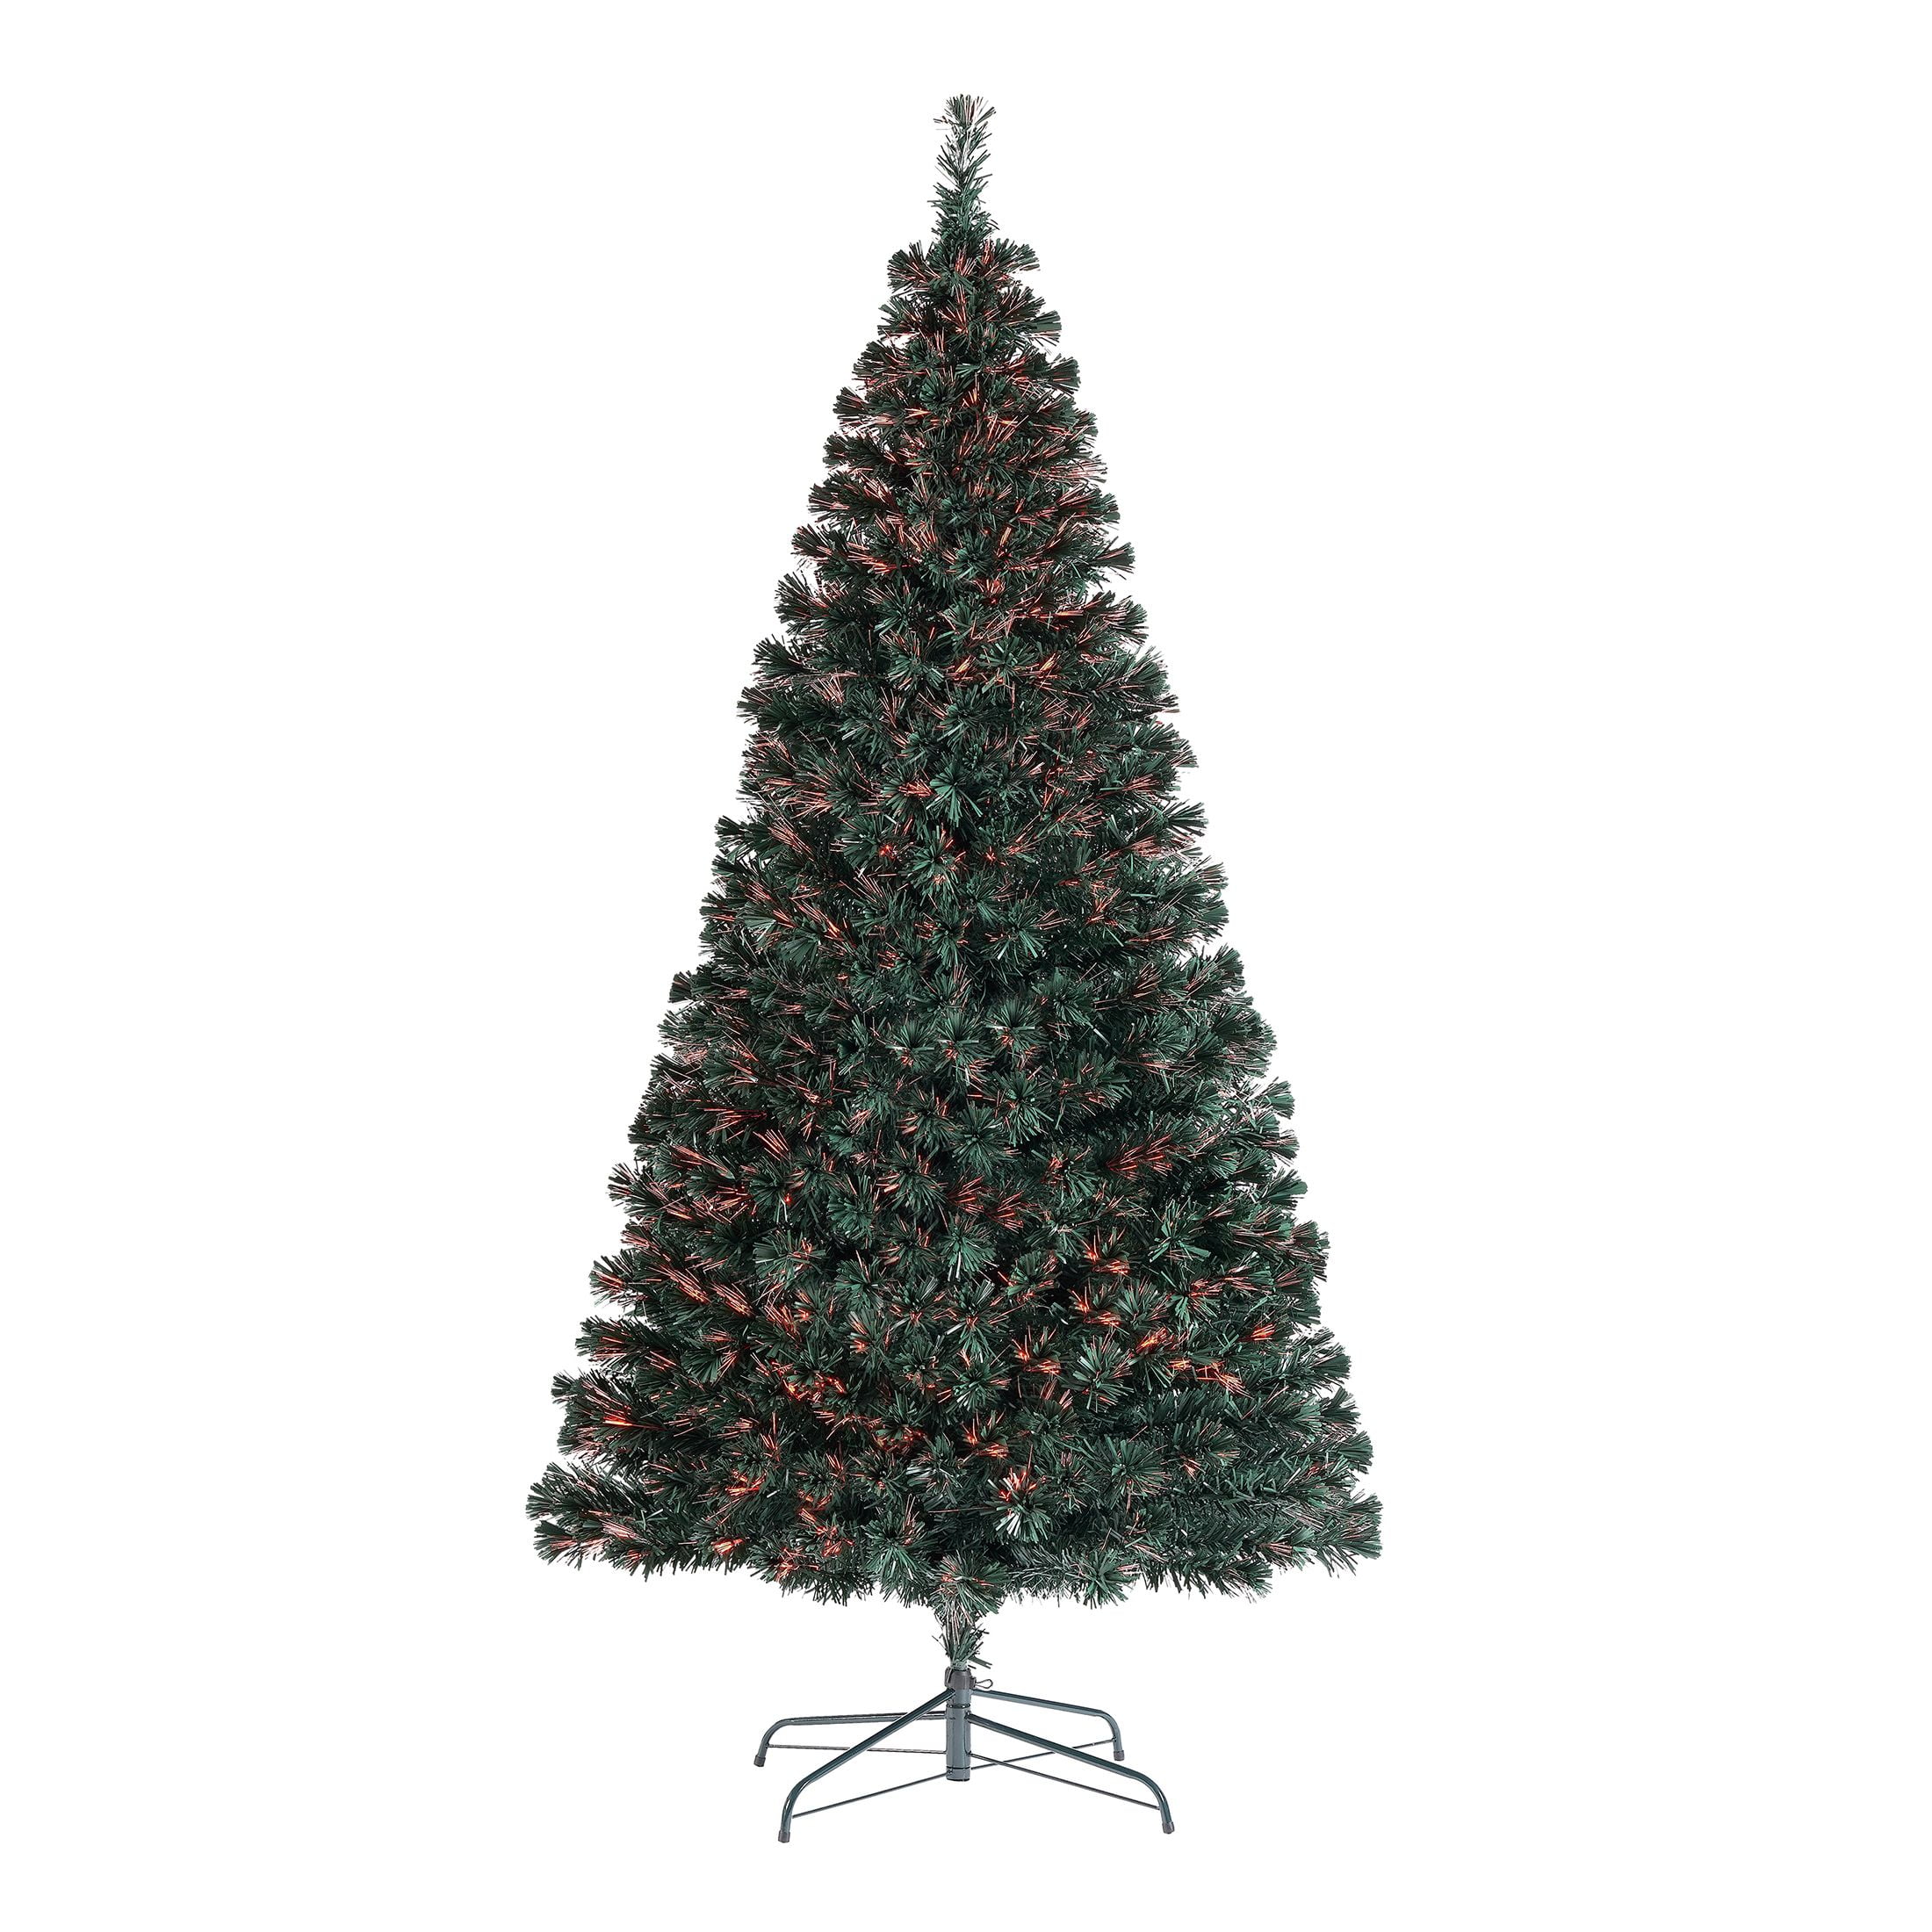 Holiday Time Prelit Fiber Optic Spruce Artificial Christmas Tree, 7', Multi-Color